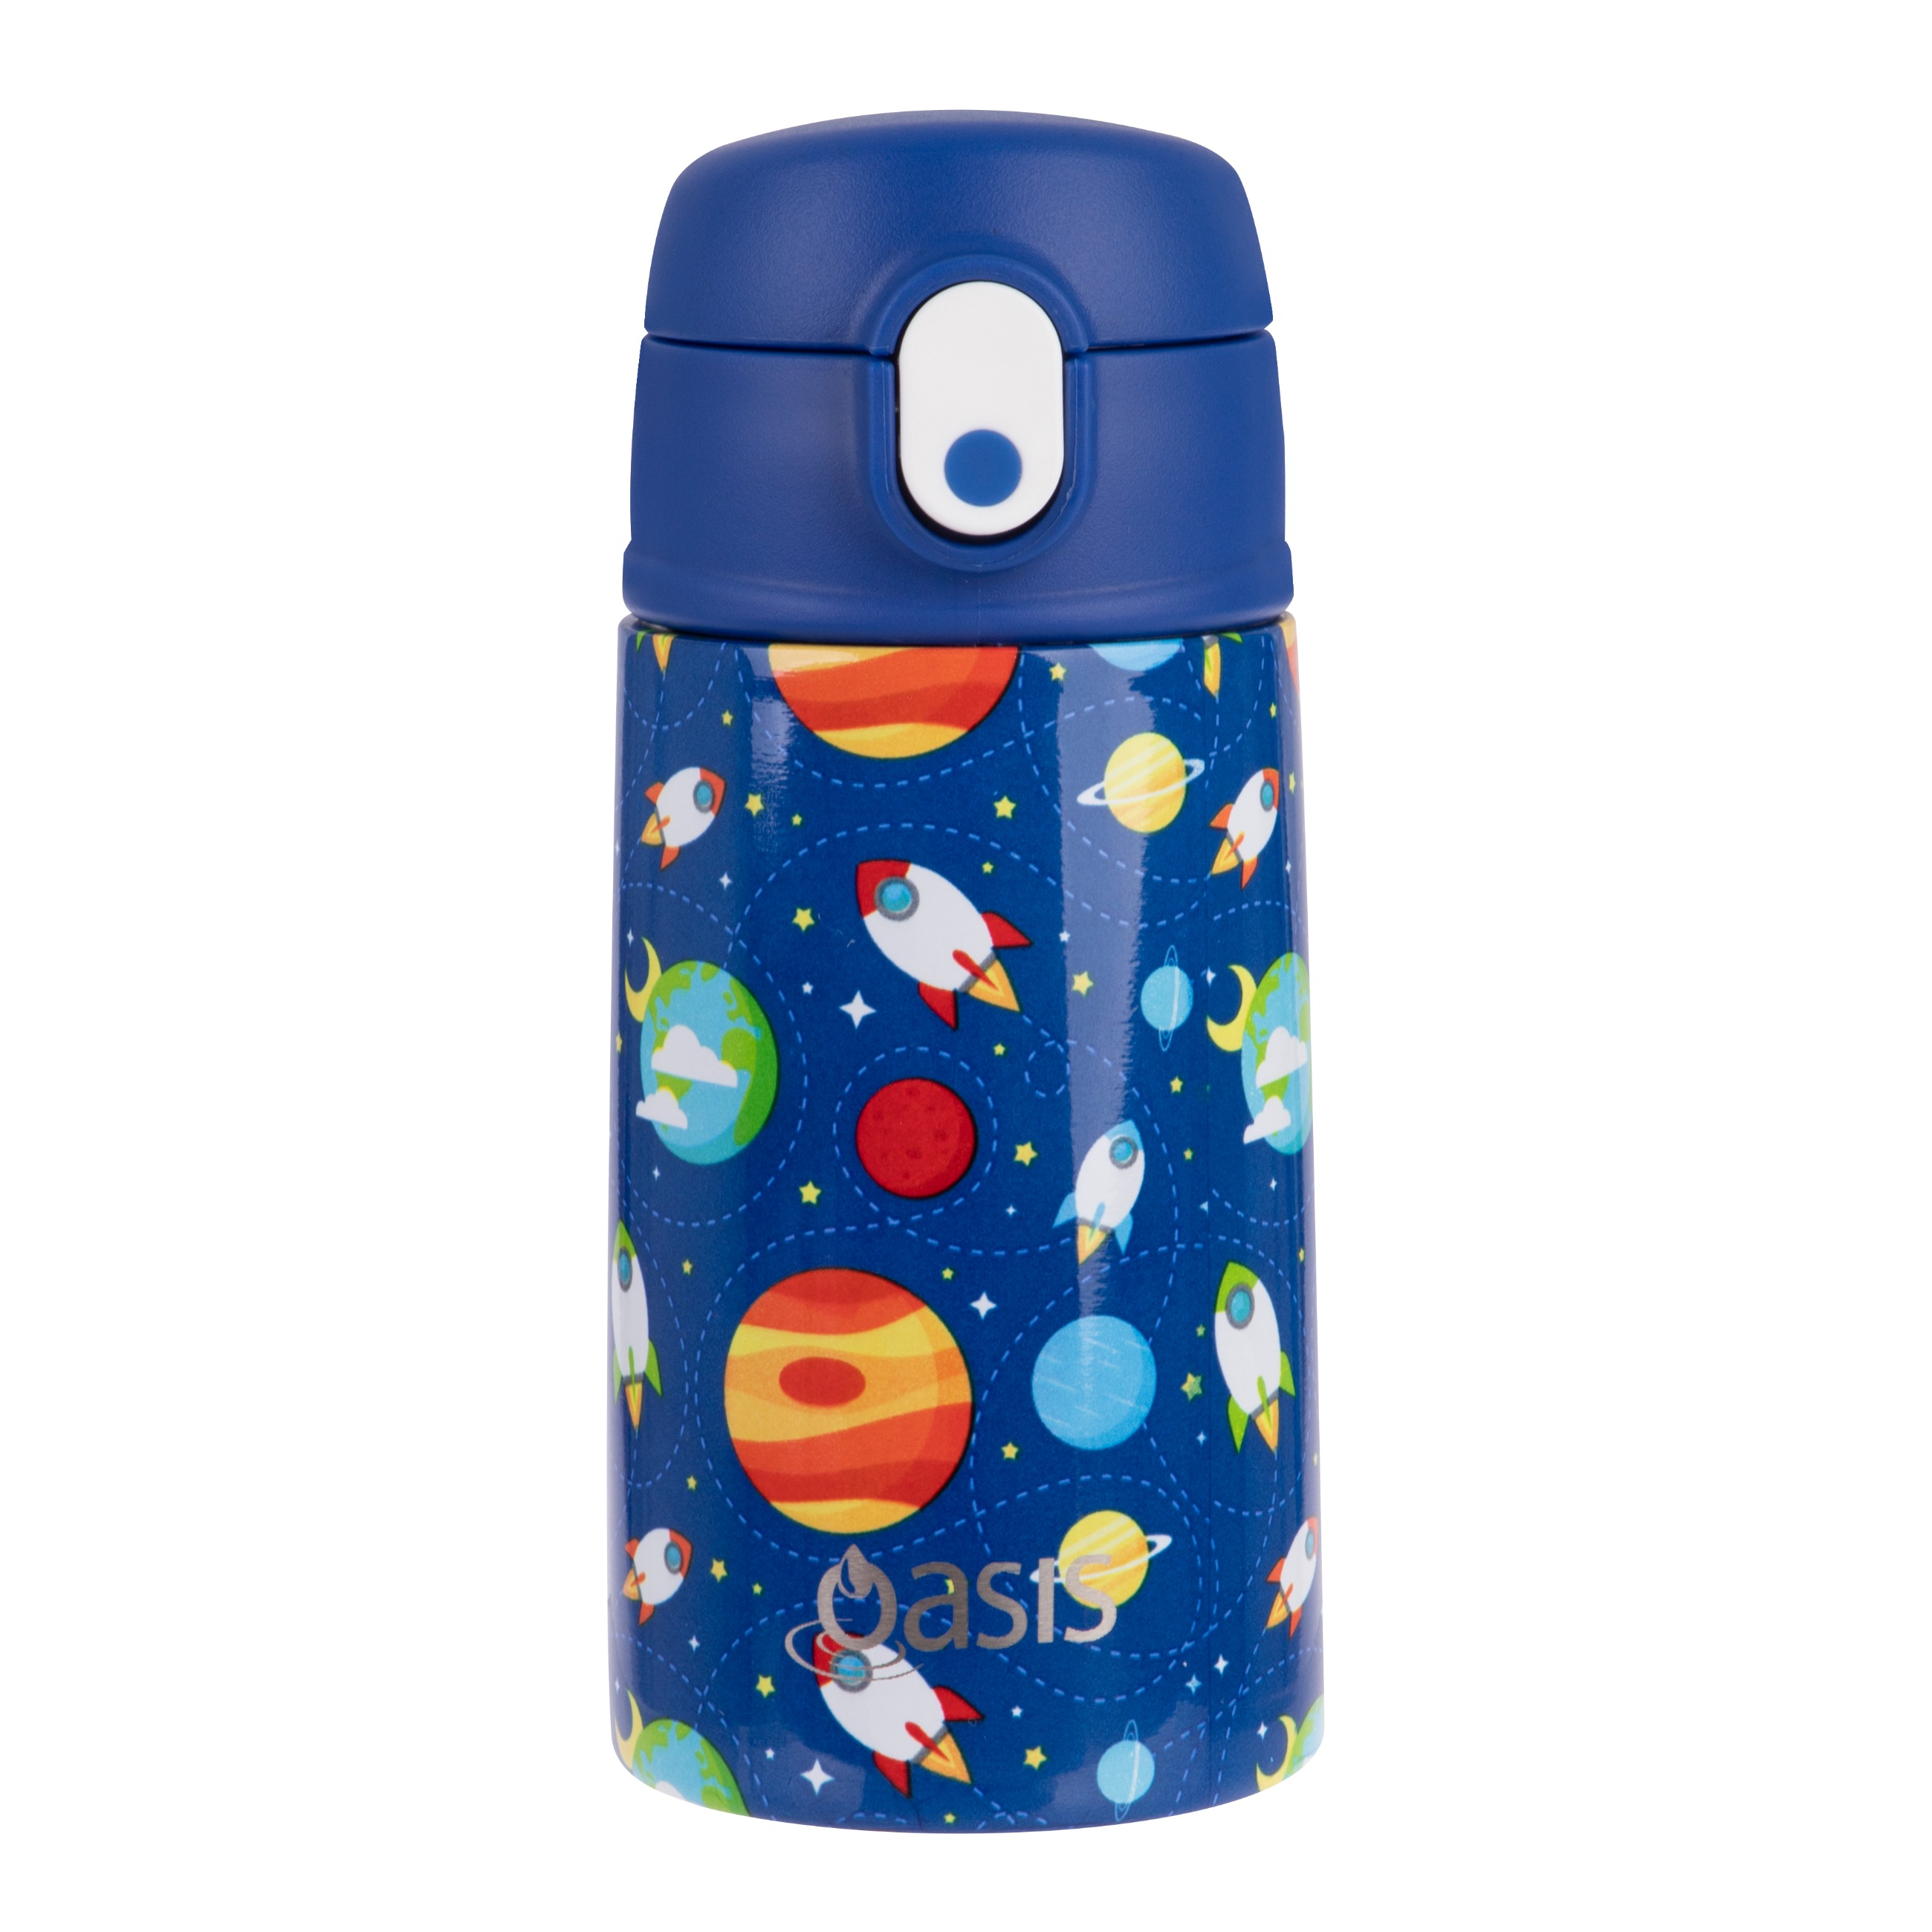 Oasis Kid's Drink Bottle with Sipper 400ml Outer Space